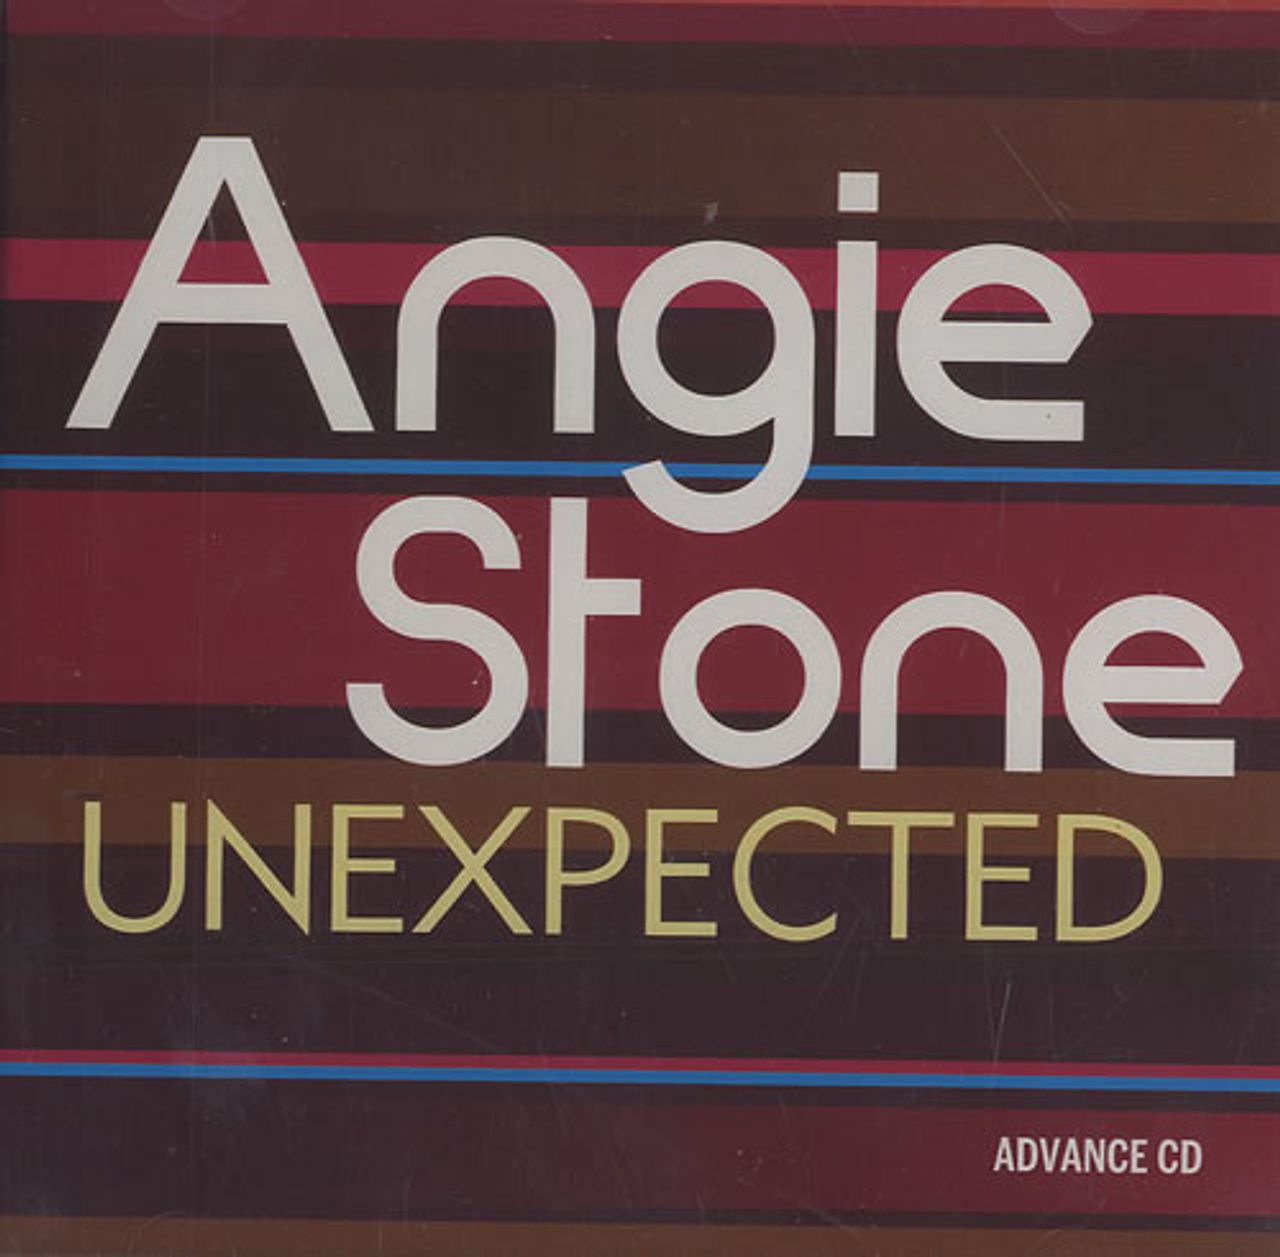 Angie Stone Unexpected US Promo CD-R acetate CDR ACETATE